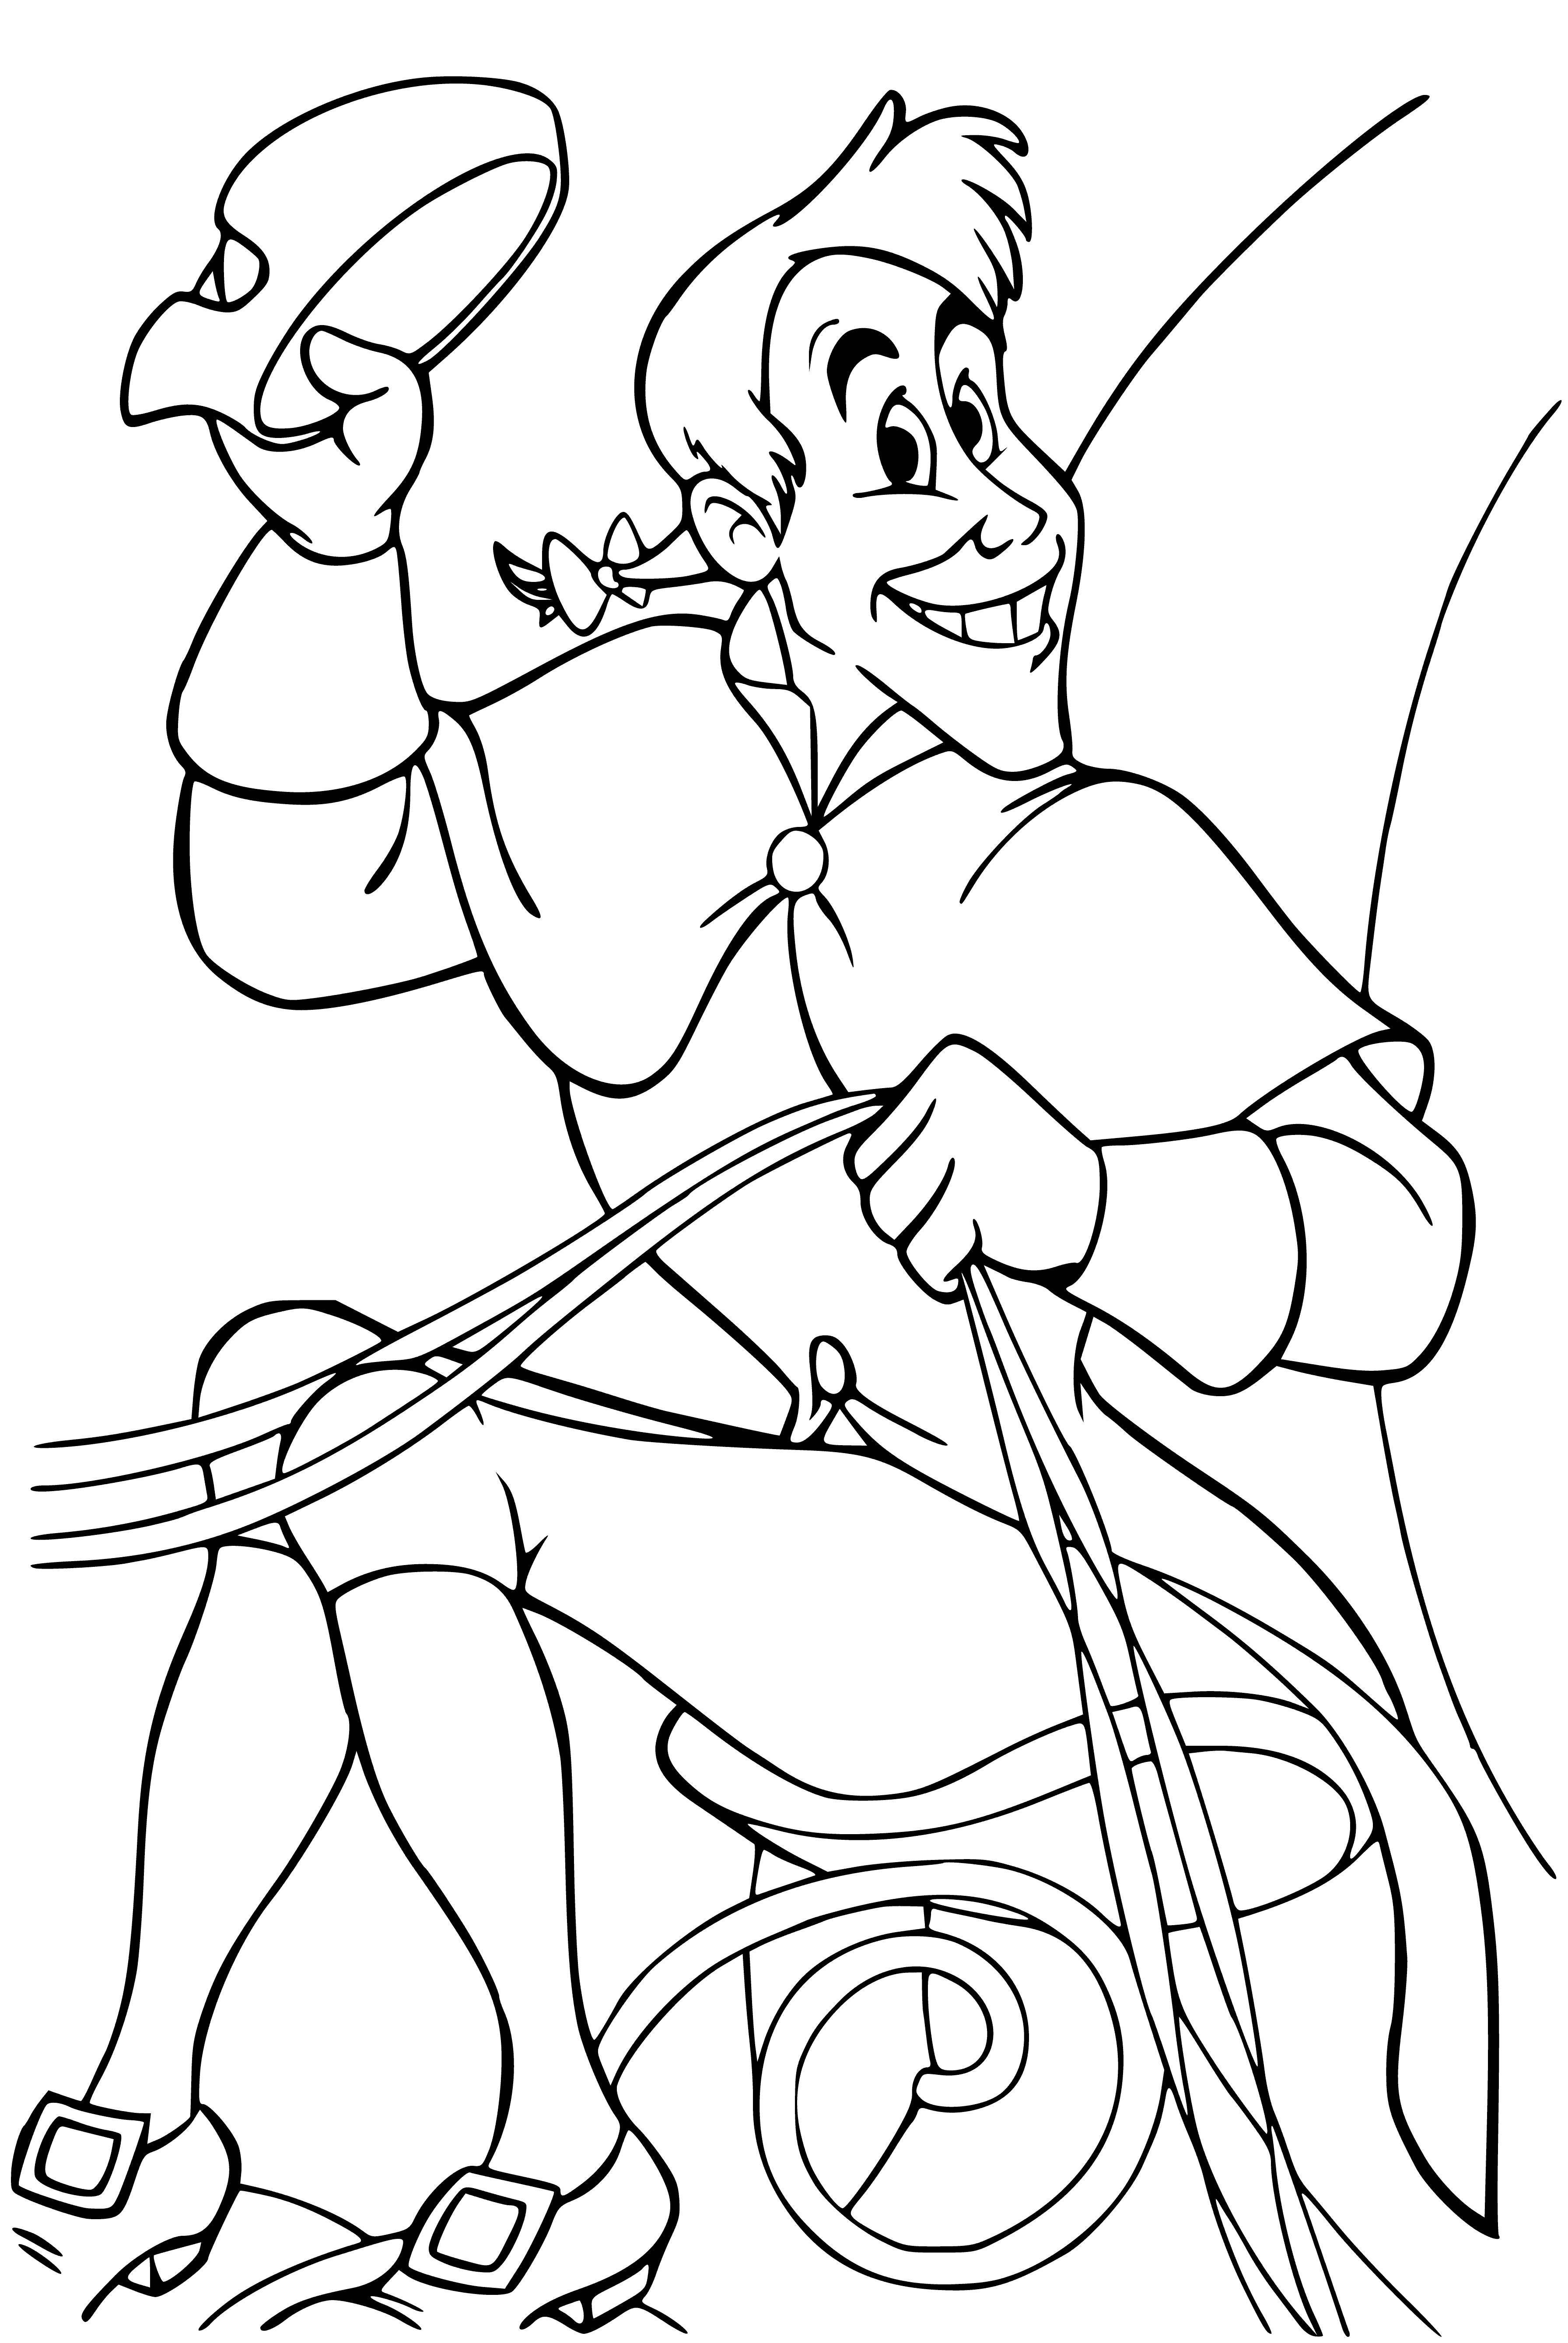 turns into a coachman coloring page